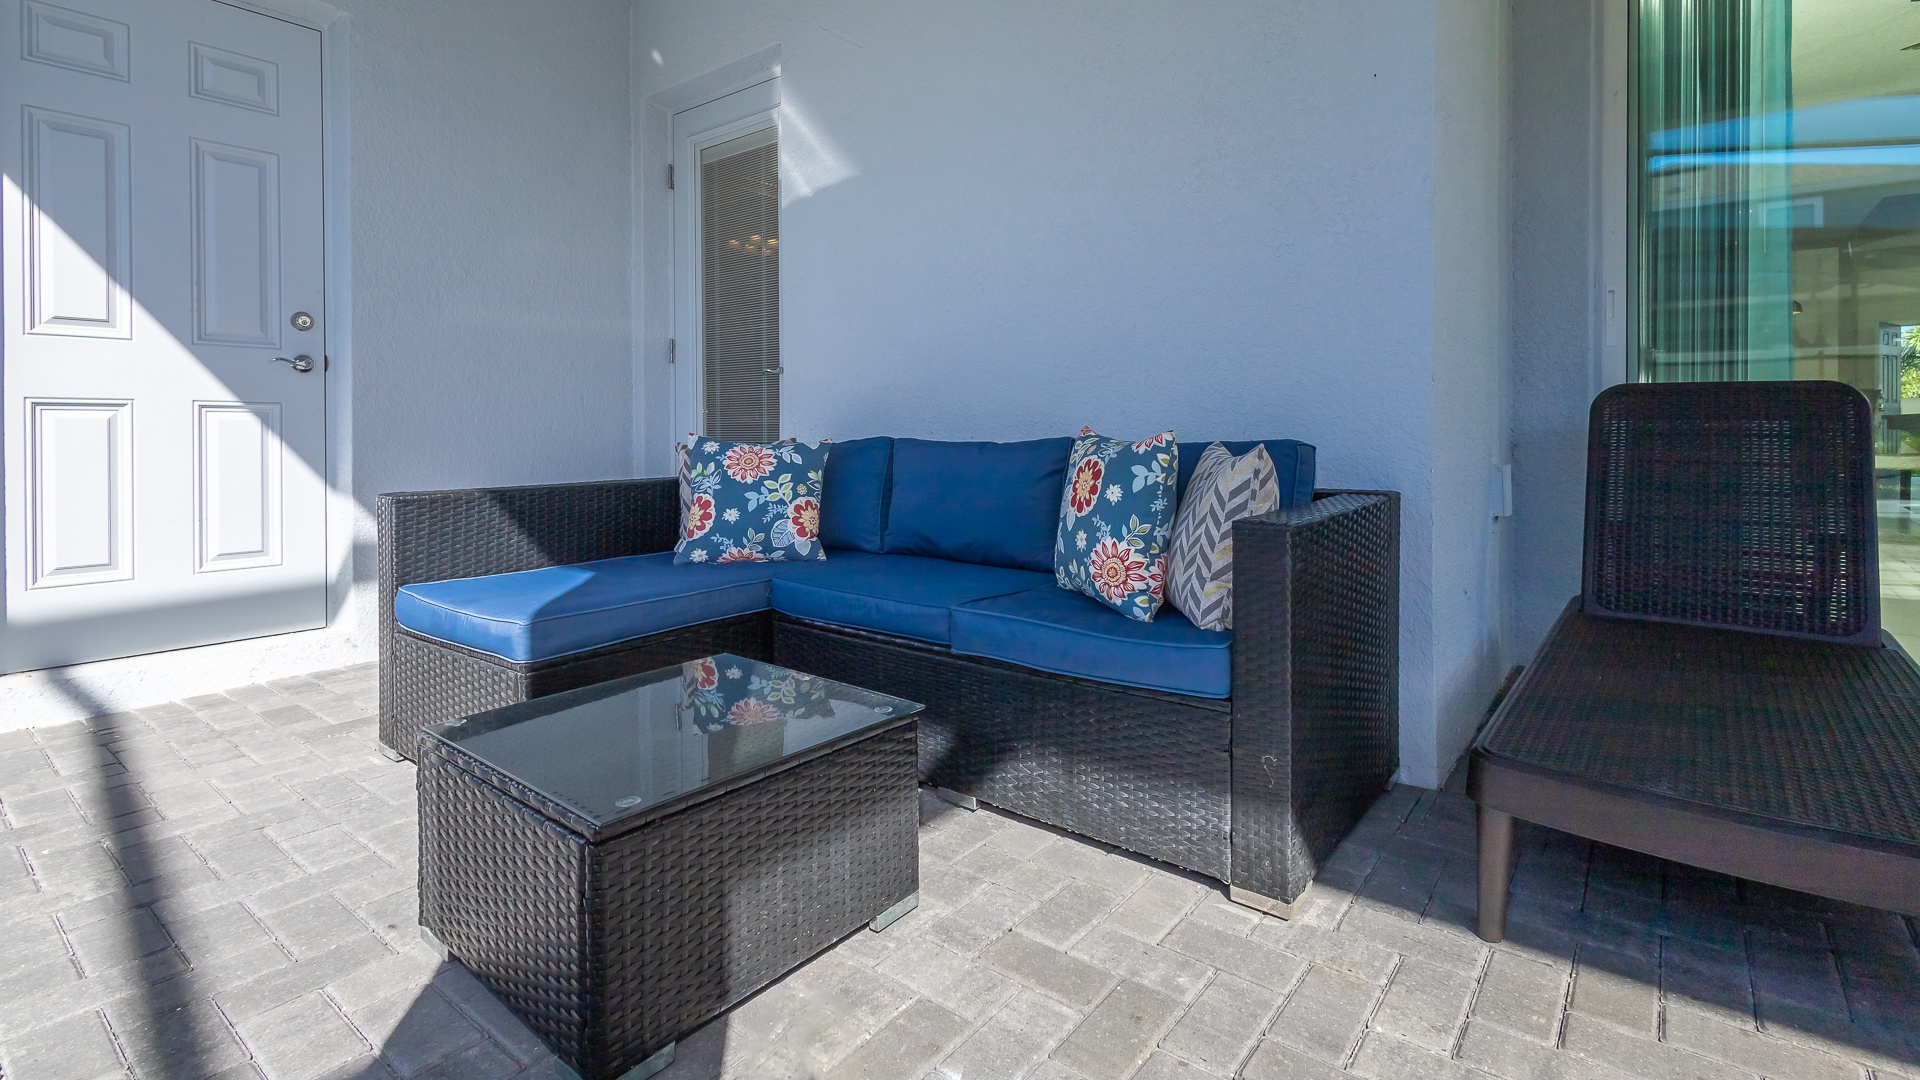 Lounge the day away or enjoy a meal on the covered back patio